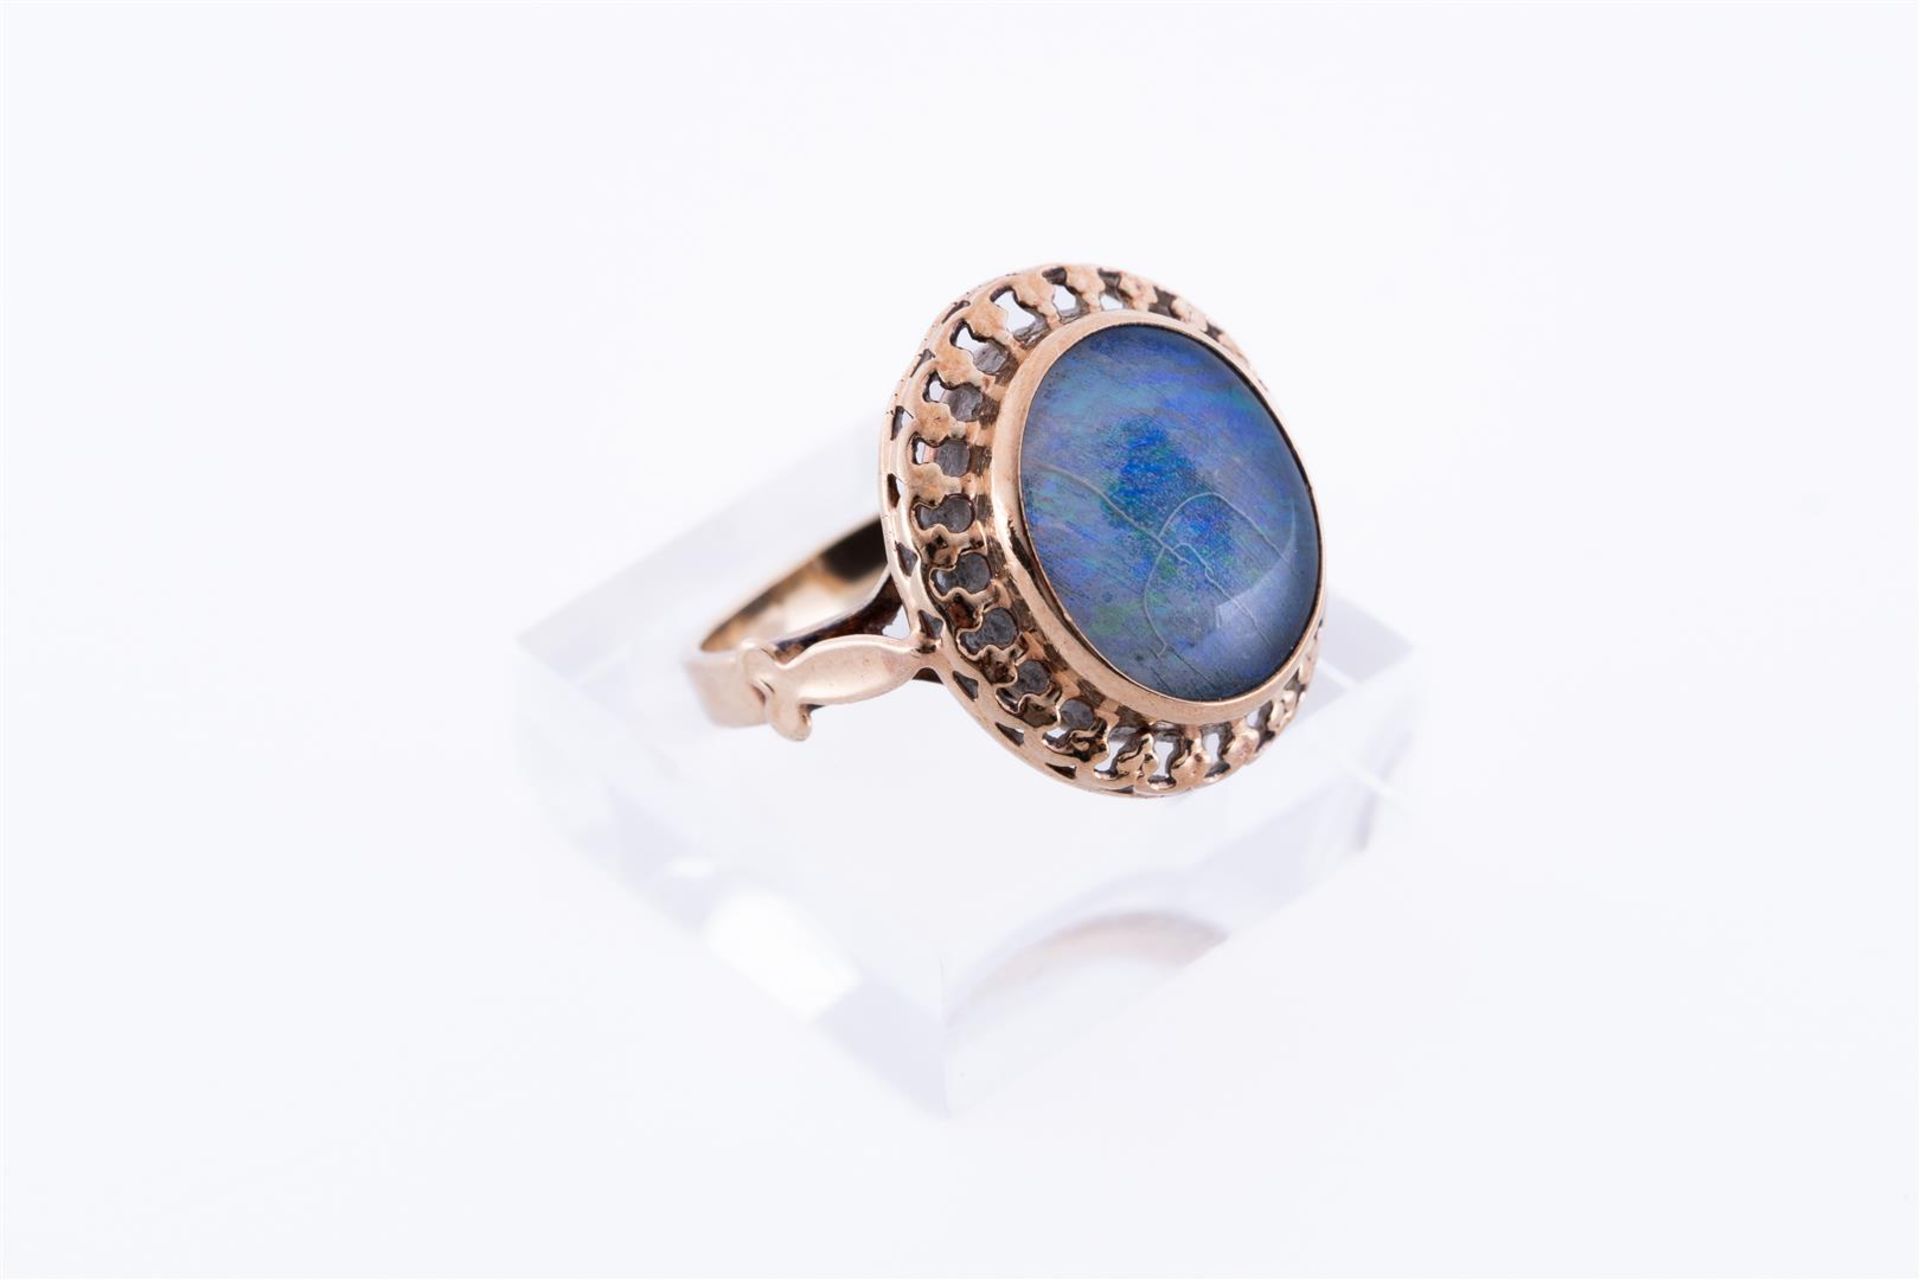 9kt Yellow gold openwork ring set with a cabochon cut oval triplet opal.
Stone dimensions: approx. 1